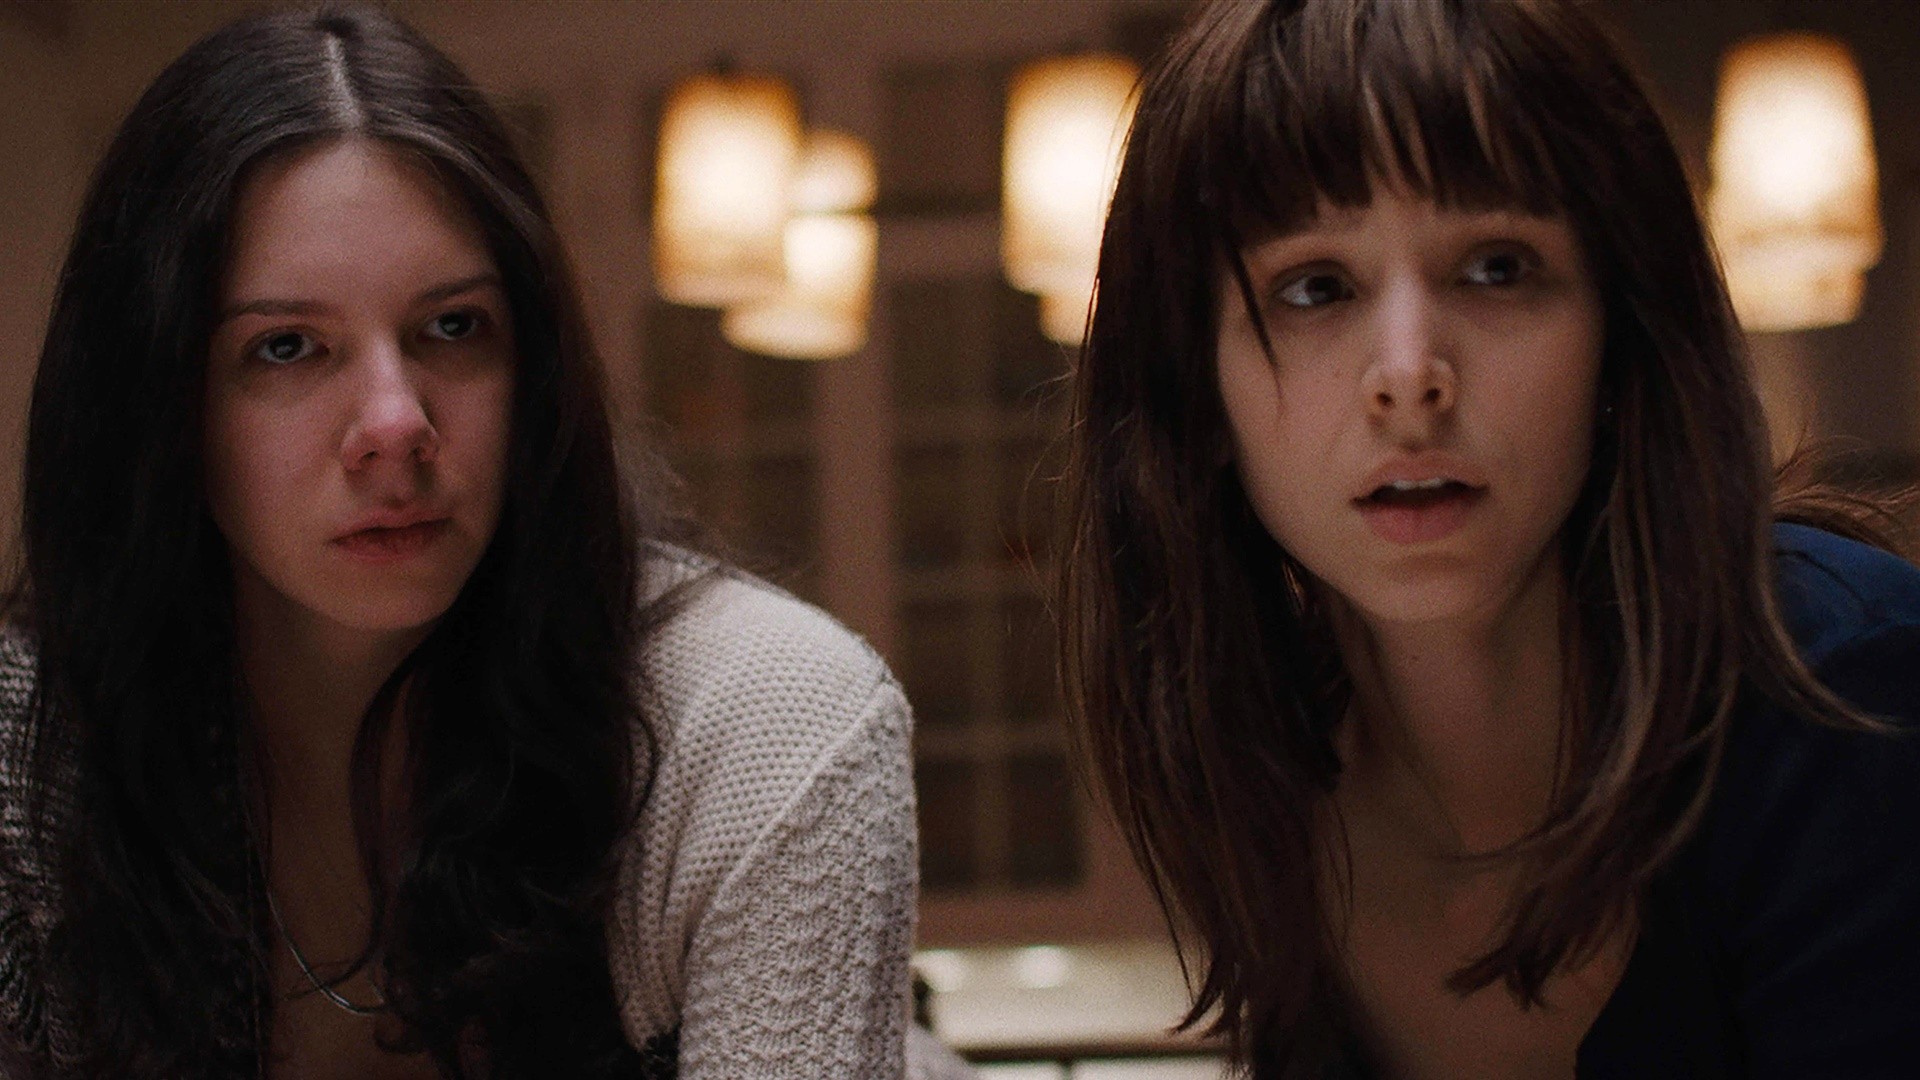 Lauren Molina stars as Mel and Helen Rogers stars as Holly in Oscilloscope Laboratories' Body (2015)